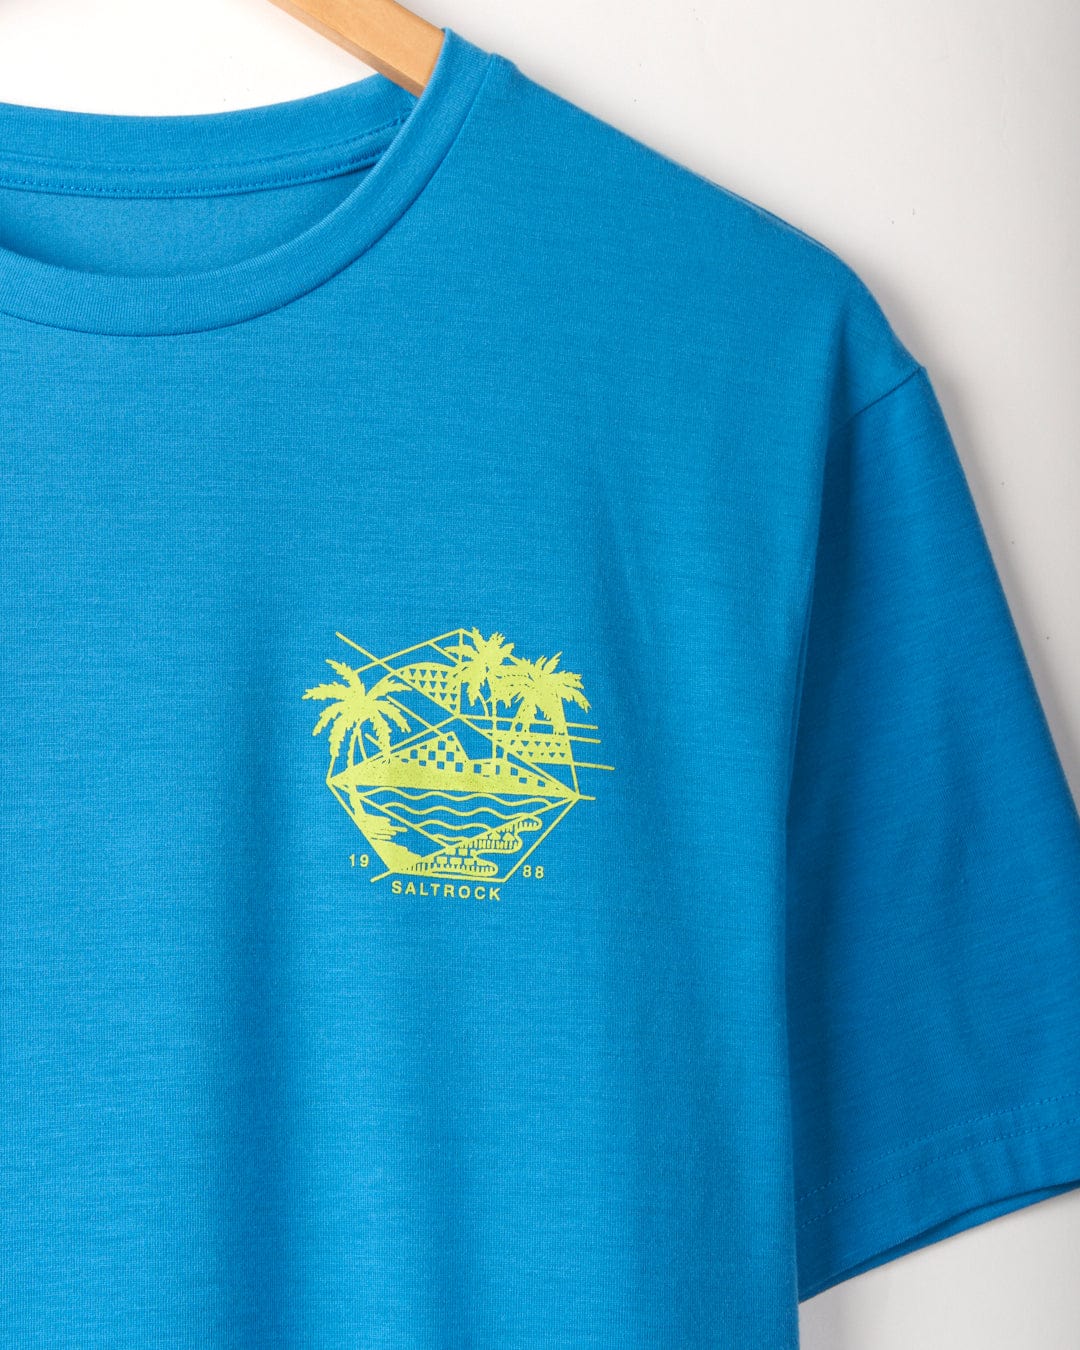 Geo Palms Solid - Mens Recycled T-Shirt - Blue hanging on a wooden hanger, featuring a yellow graphic design on the left chest depicting mountains, a river, and palm trees. Made from recycled material for an eco-friendly touch. The text "Saltrock 1988" is included in the design.